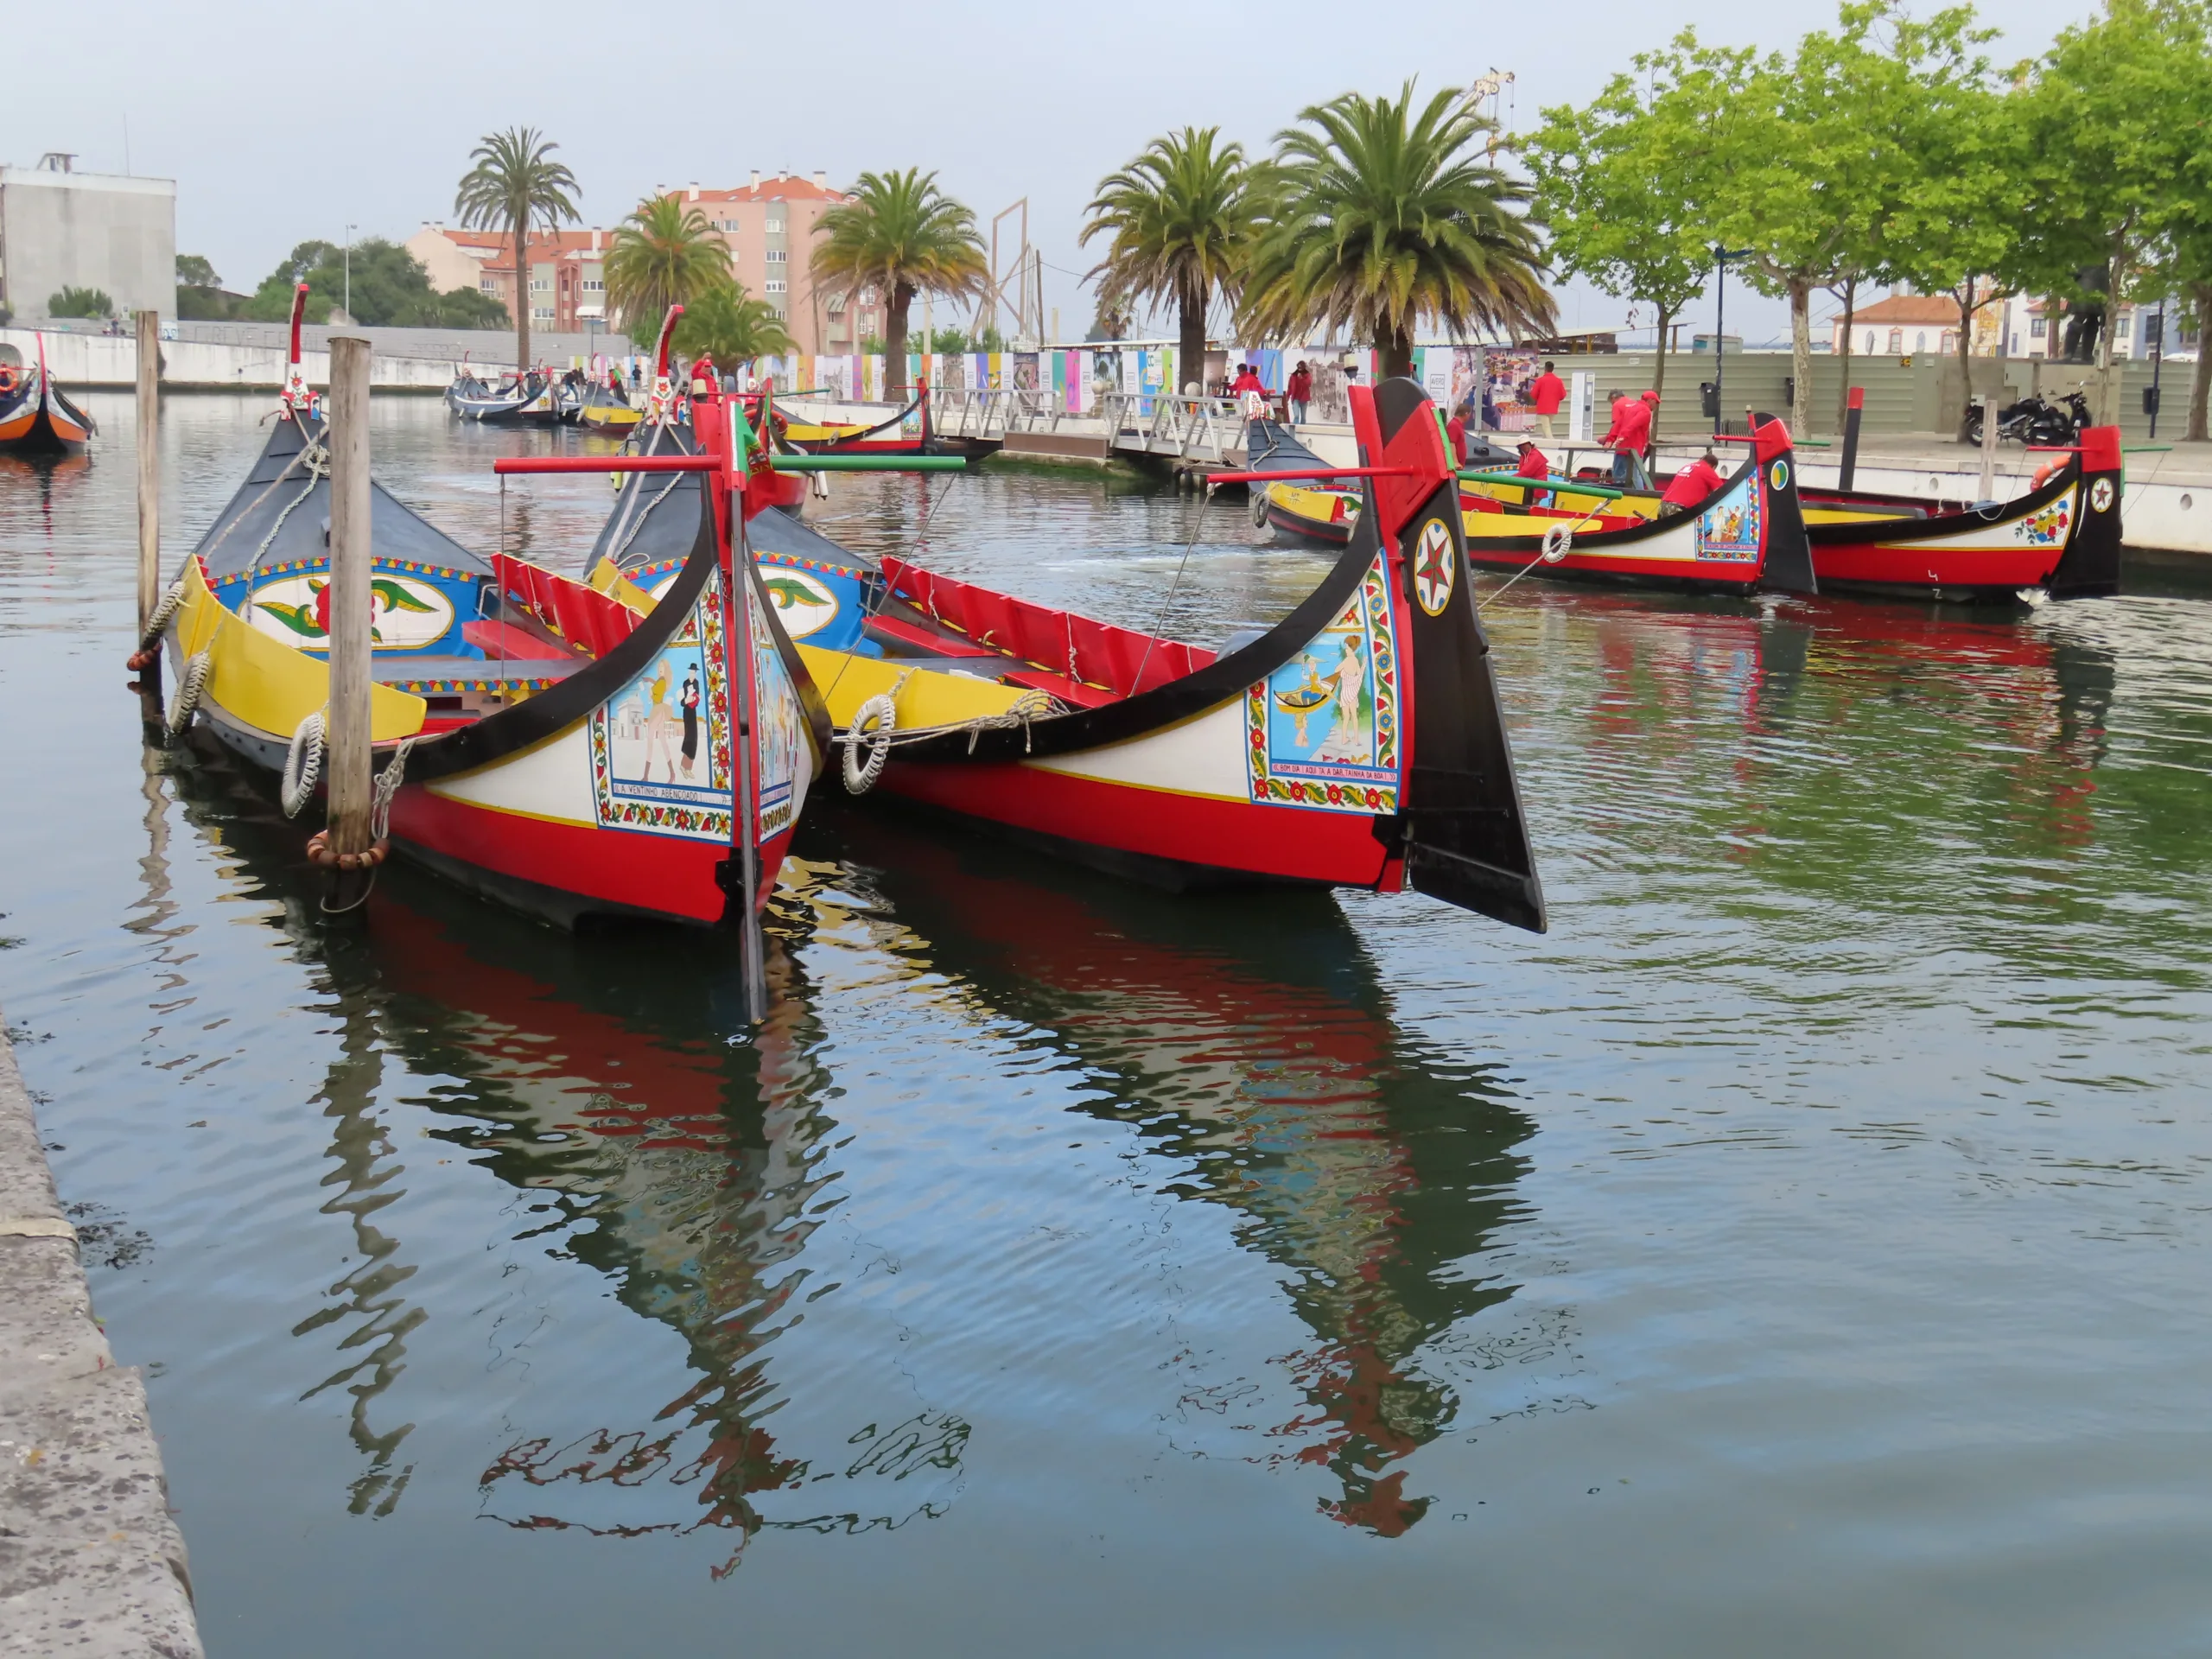 Real traveller photo of boats in Aveiro